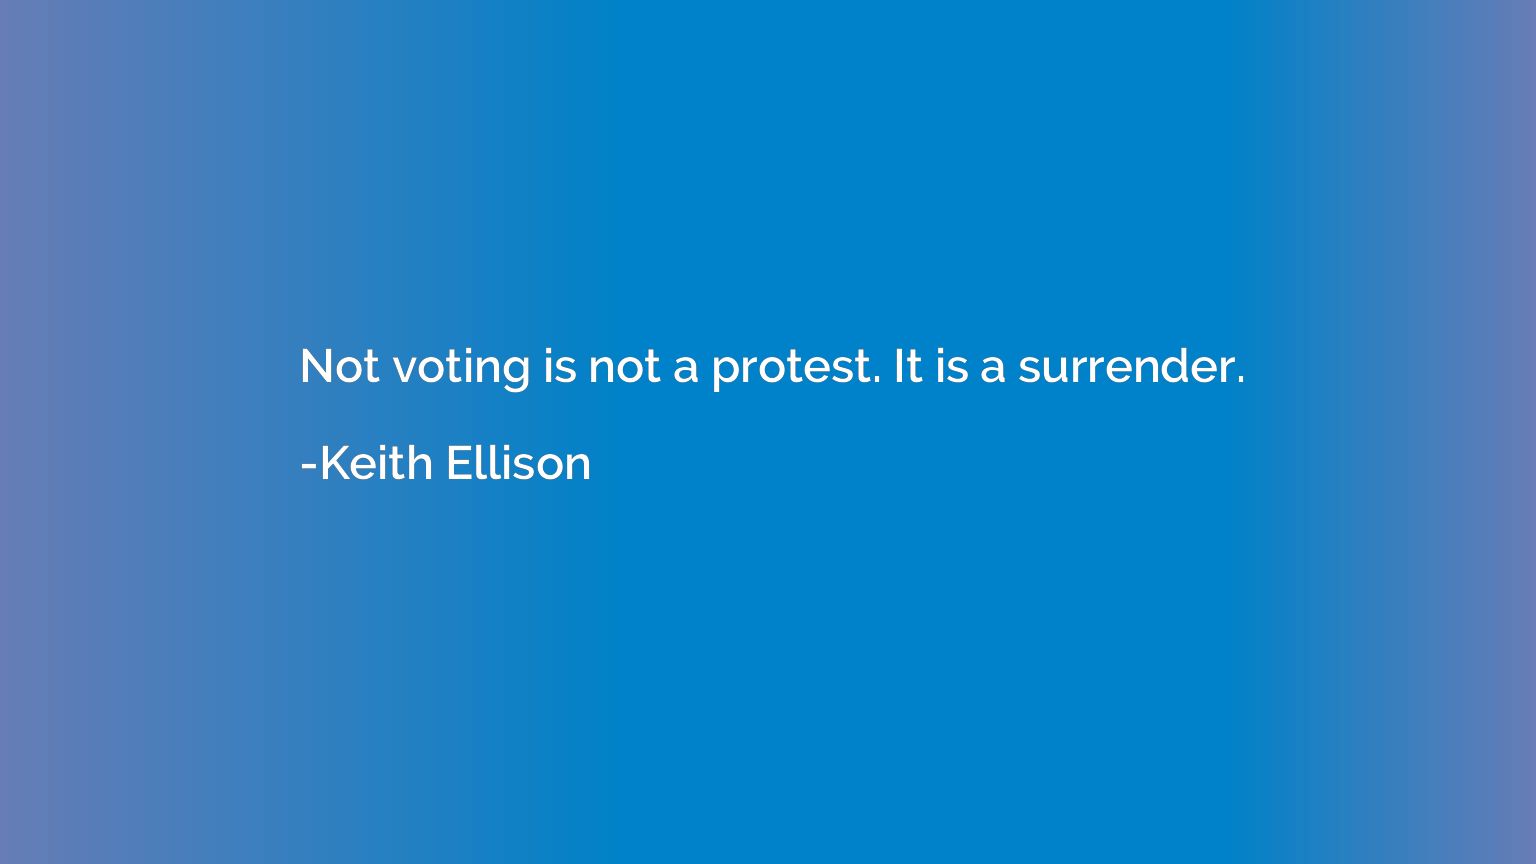 Not voting is not a protest. It is a surrender.